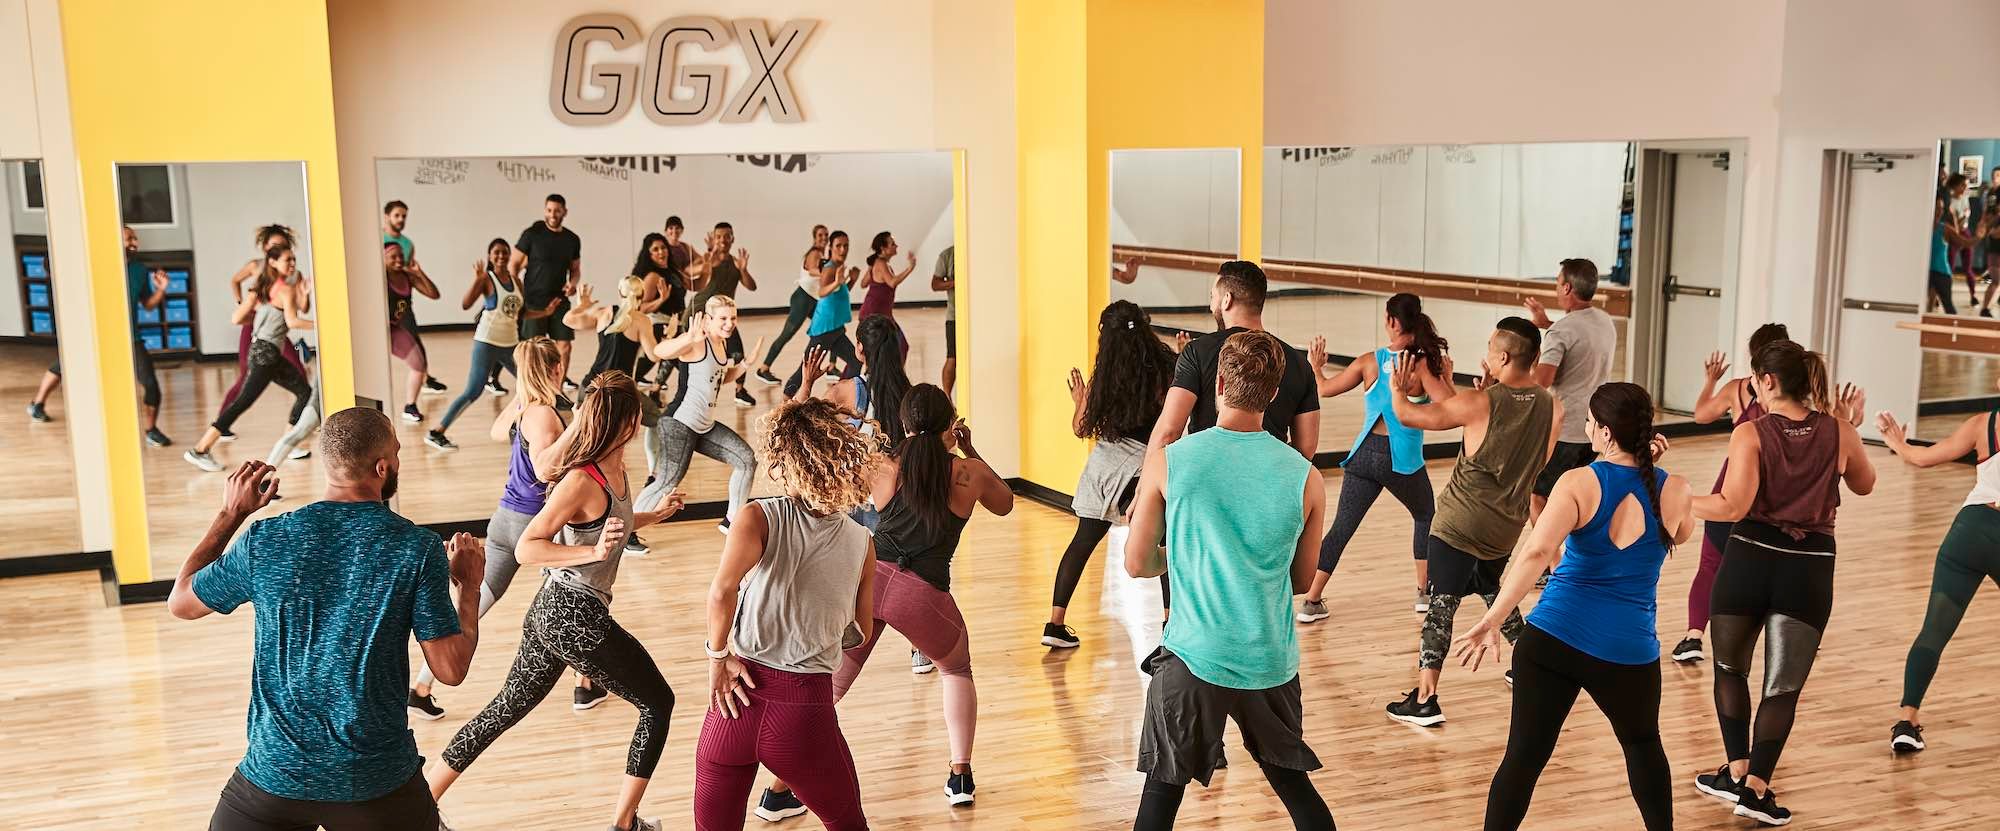 Gold S Gym Socal Offers The Best In Group Fitness Classes